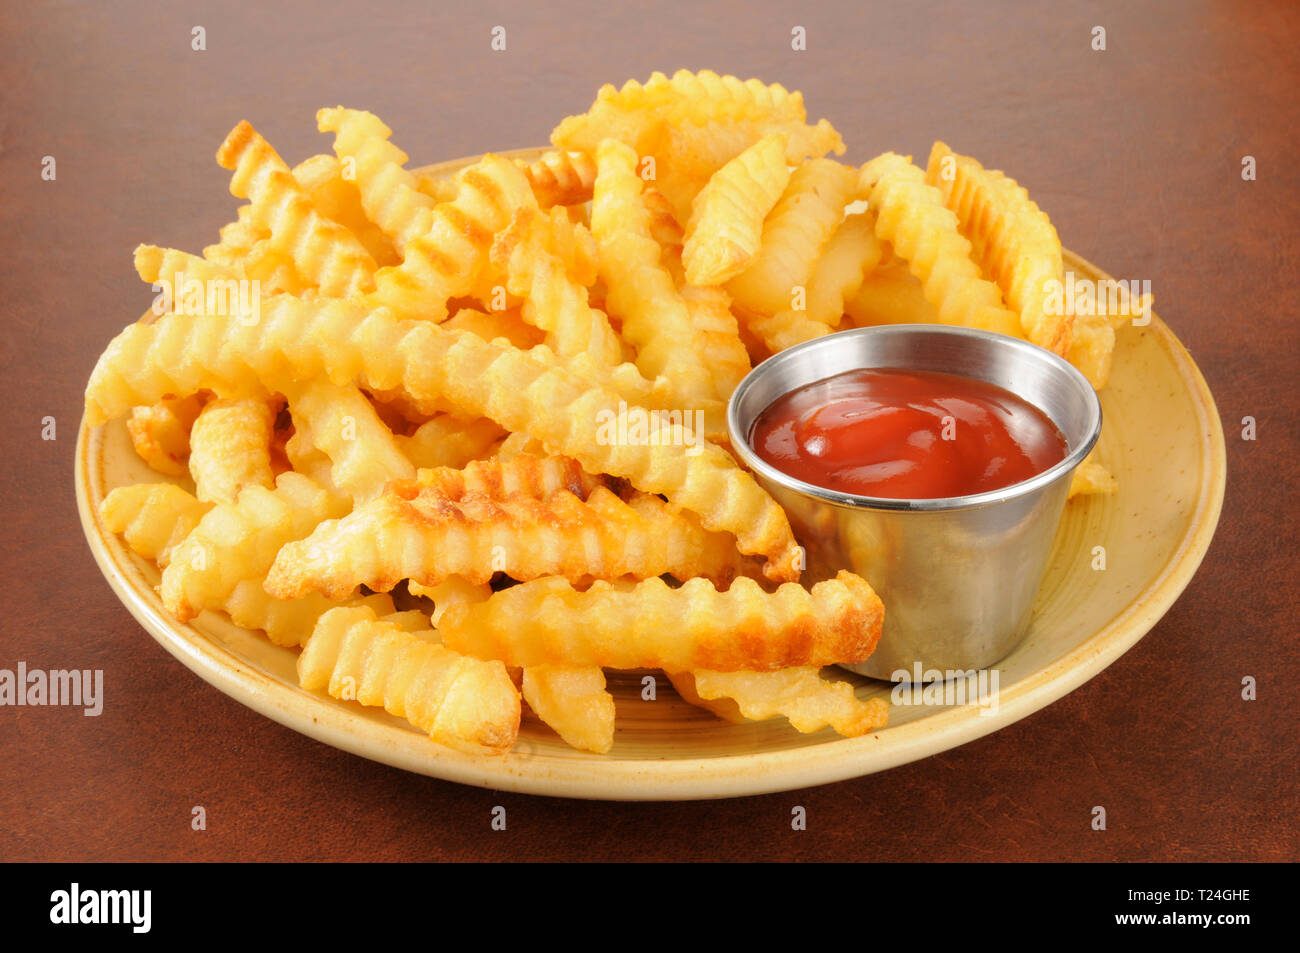 https://c8.alamy.com/comp/T24GHE/crinkle-cut-french-fries-and-a-cup-of-catsup-T24GHE.jpg